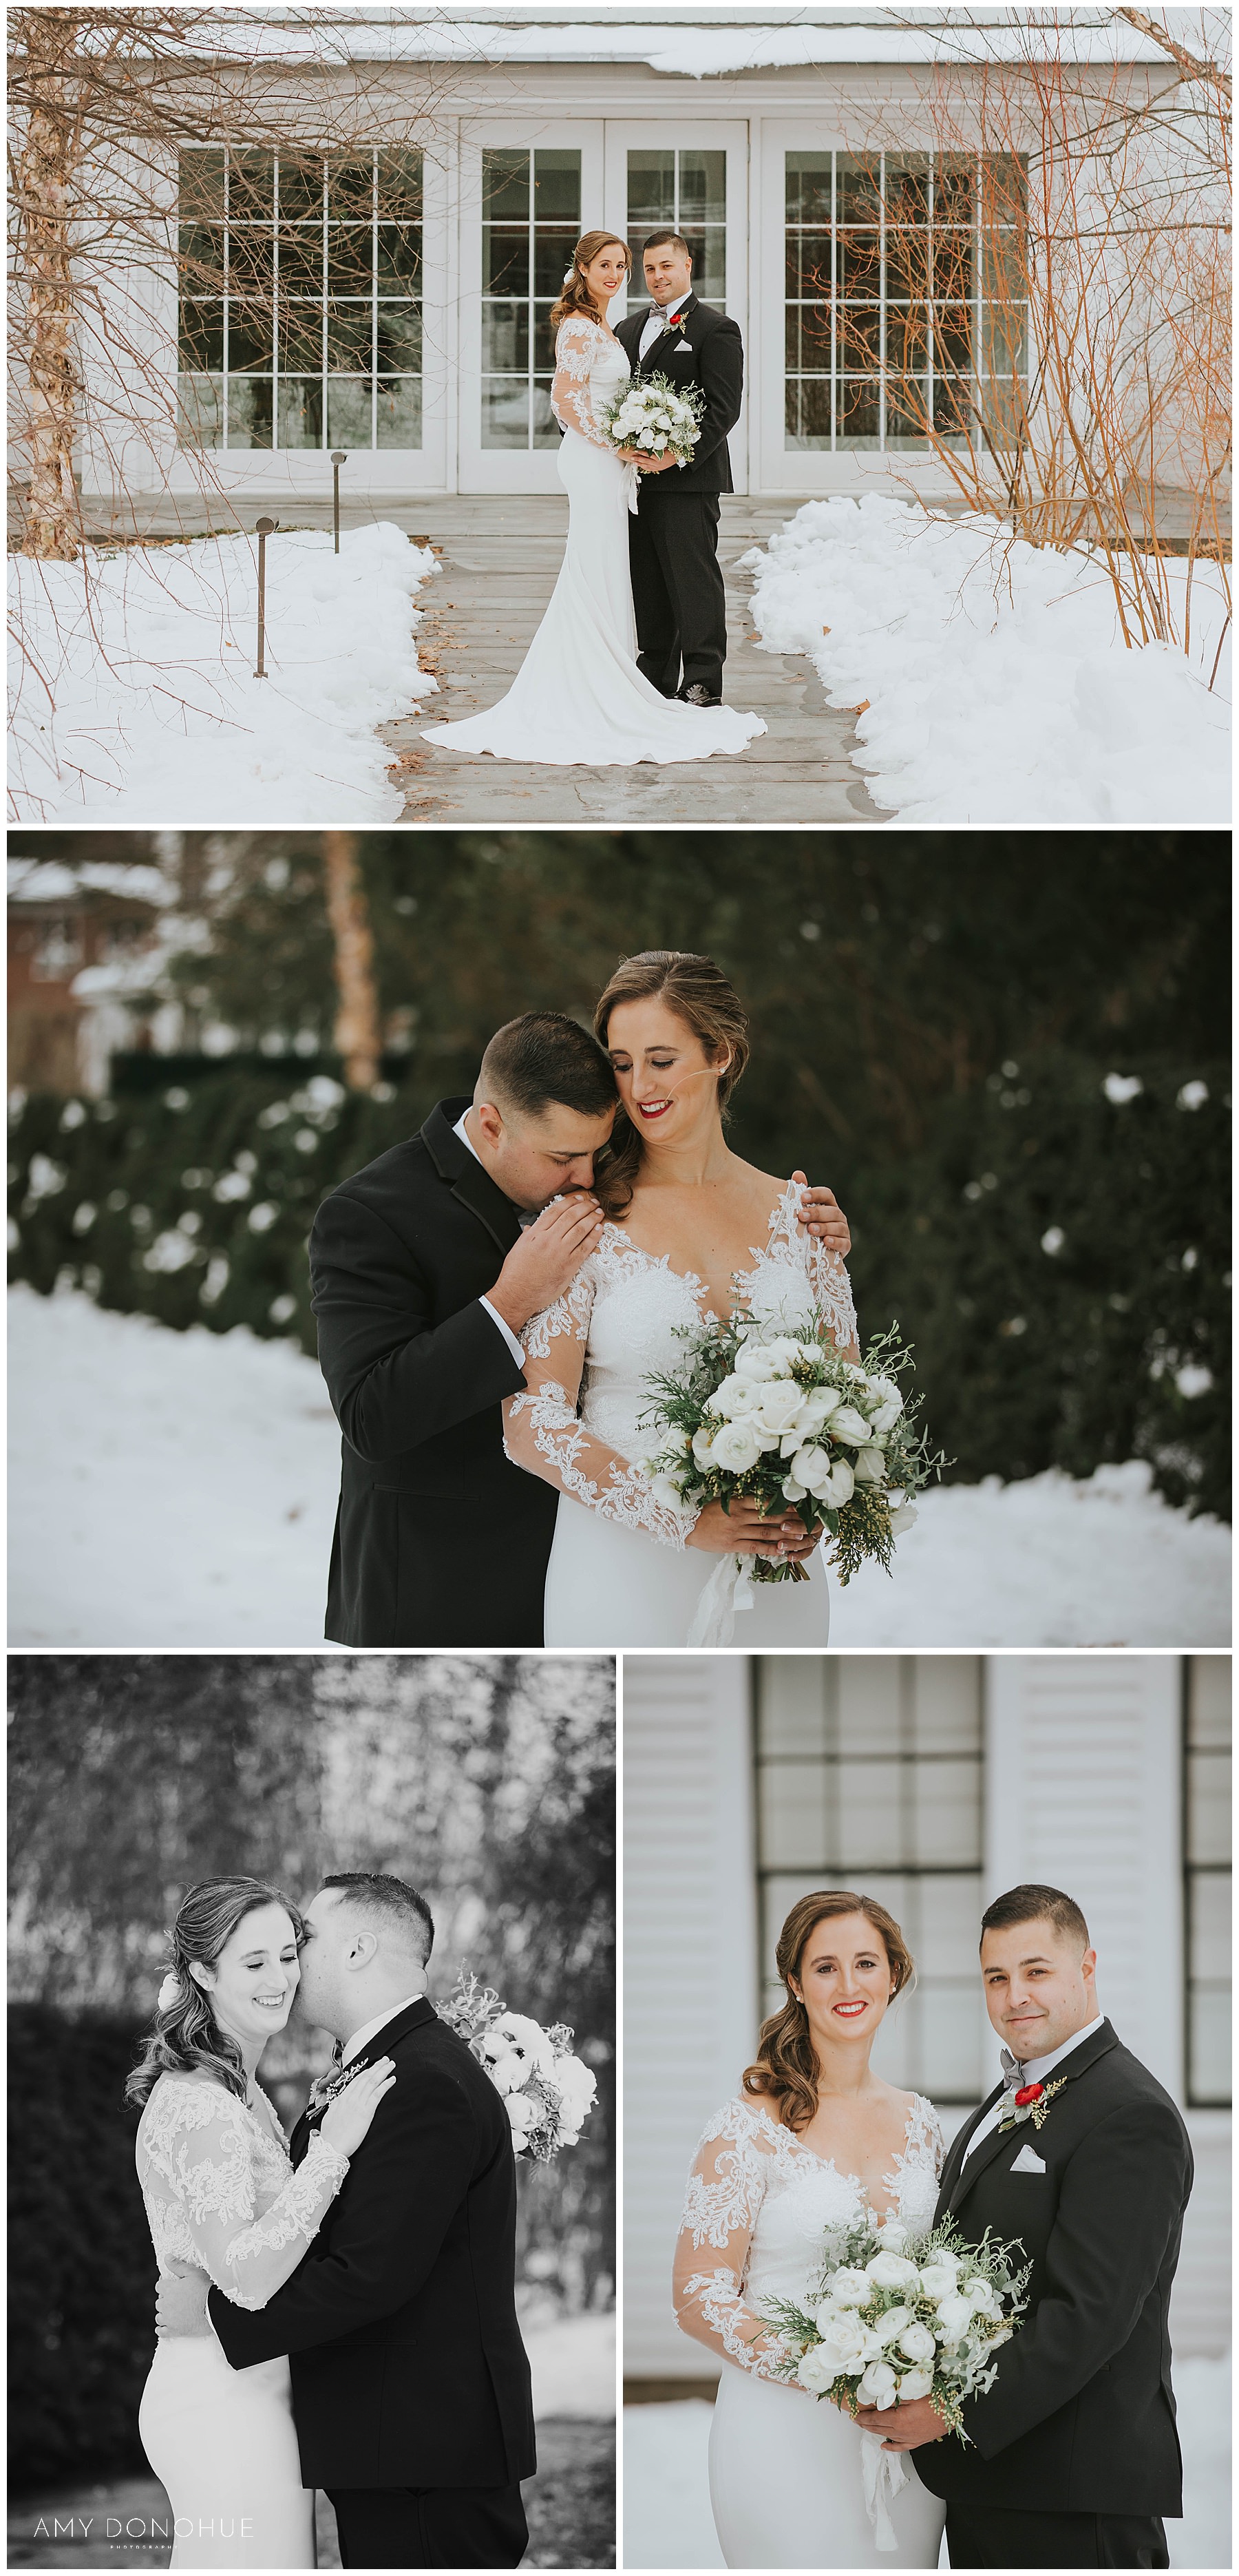 Authentic Bride and Groom Portraits | Woodstock Inn & Resort | VT Wedding Photographer | © Amy Donohue Photography